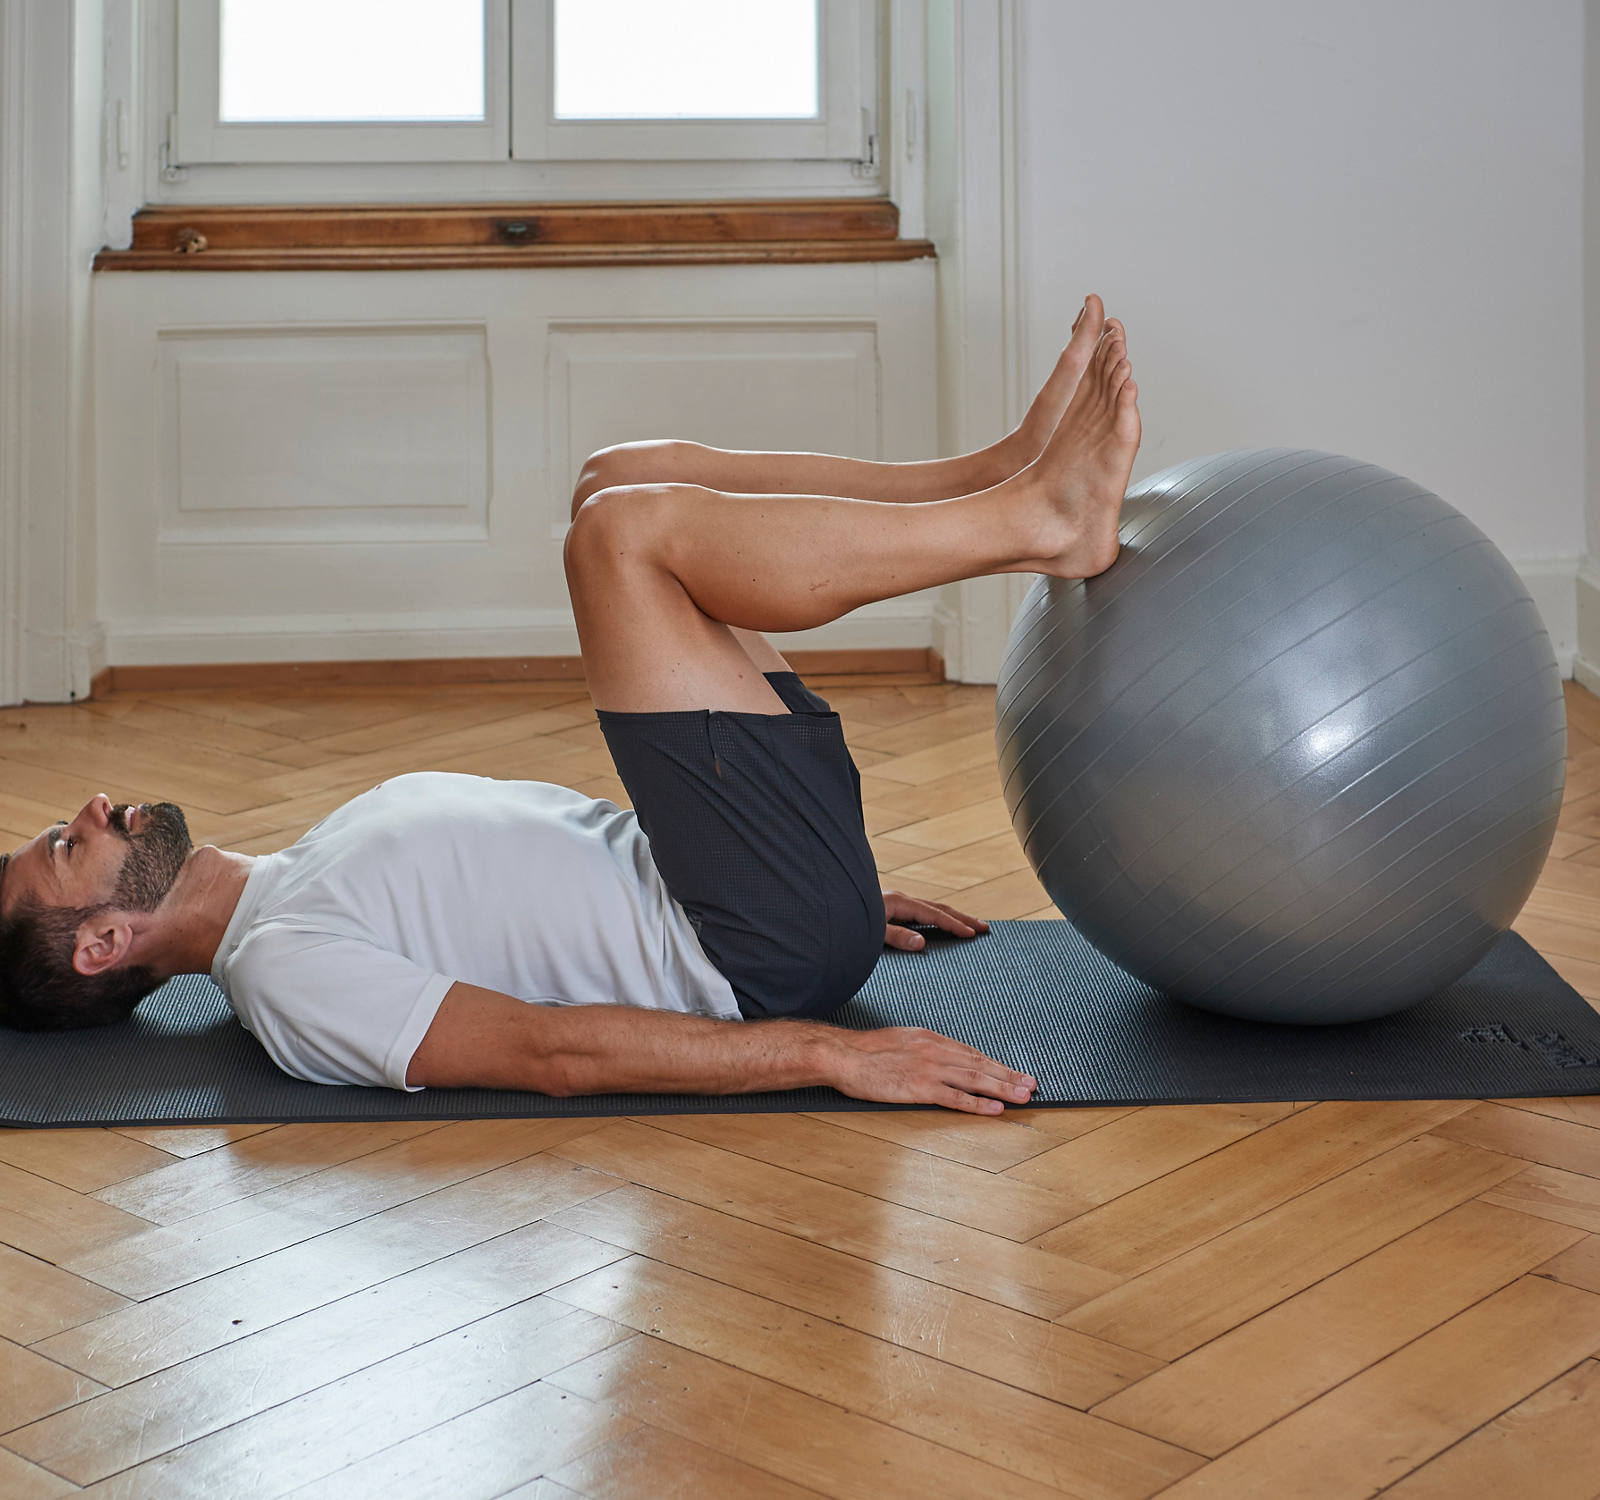 Exercise for acute lumbago and back pain